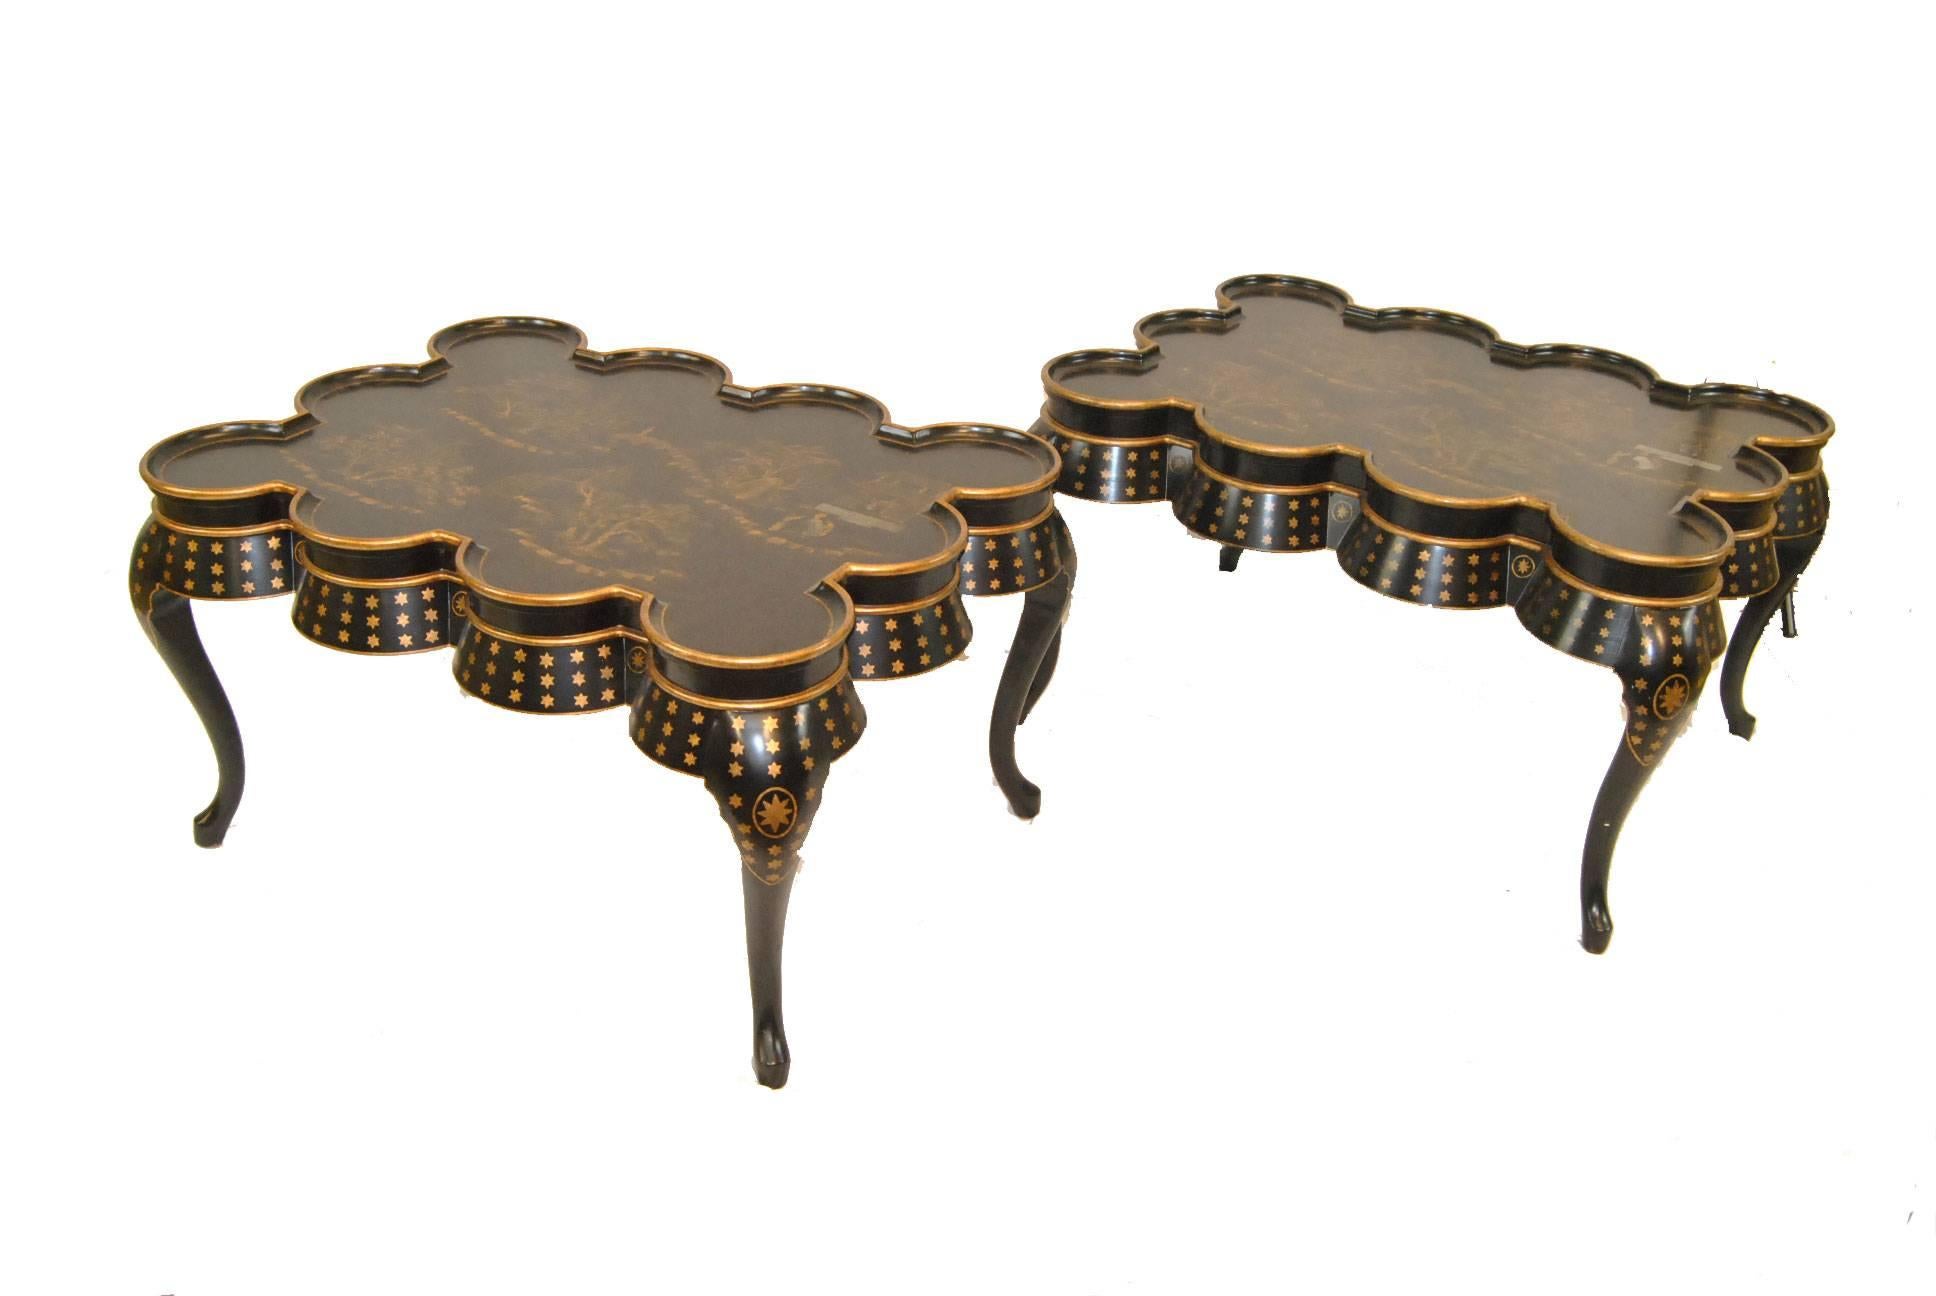 A stunning pair of chinoiserie table by Maitland Smith. Beautifully hand painted gold gilt on black. They feature a scalloped edge atop cabriole legs. Sure to enhance amy decor. Very good condition with minor crazing to the tops. Dimensions: 29